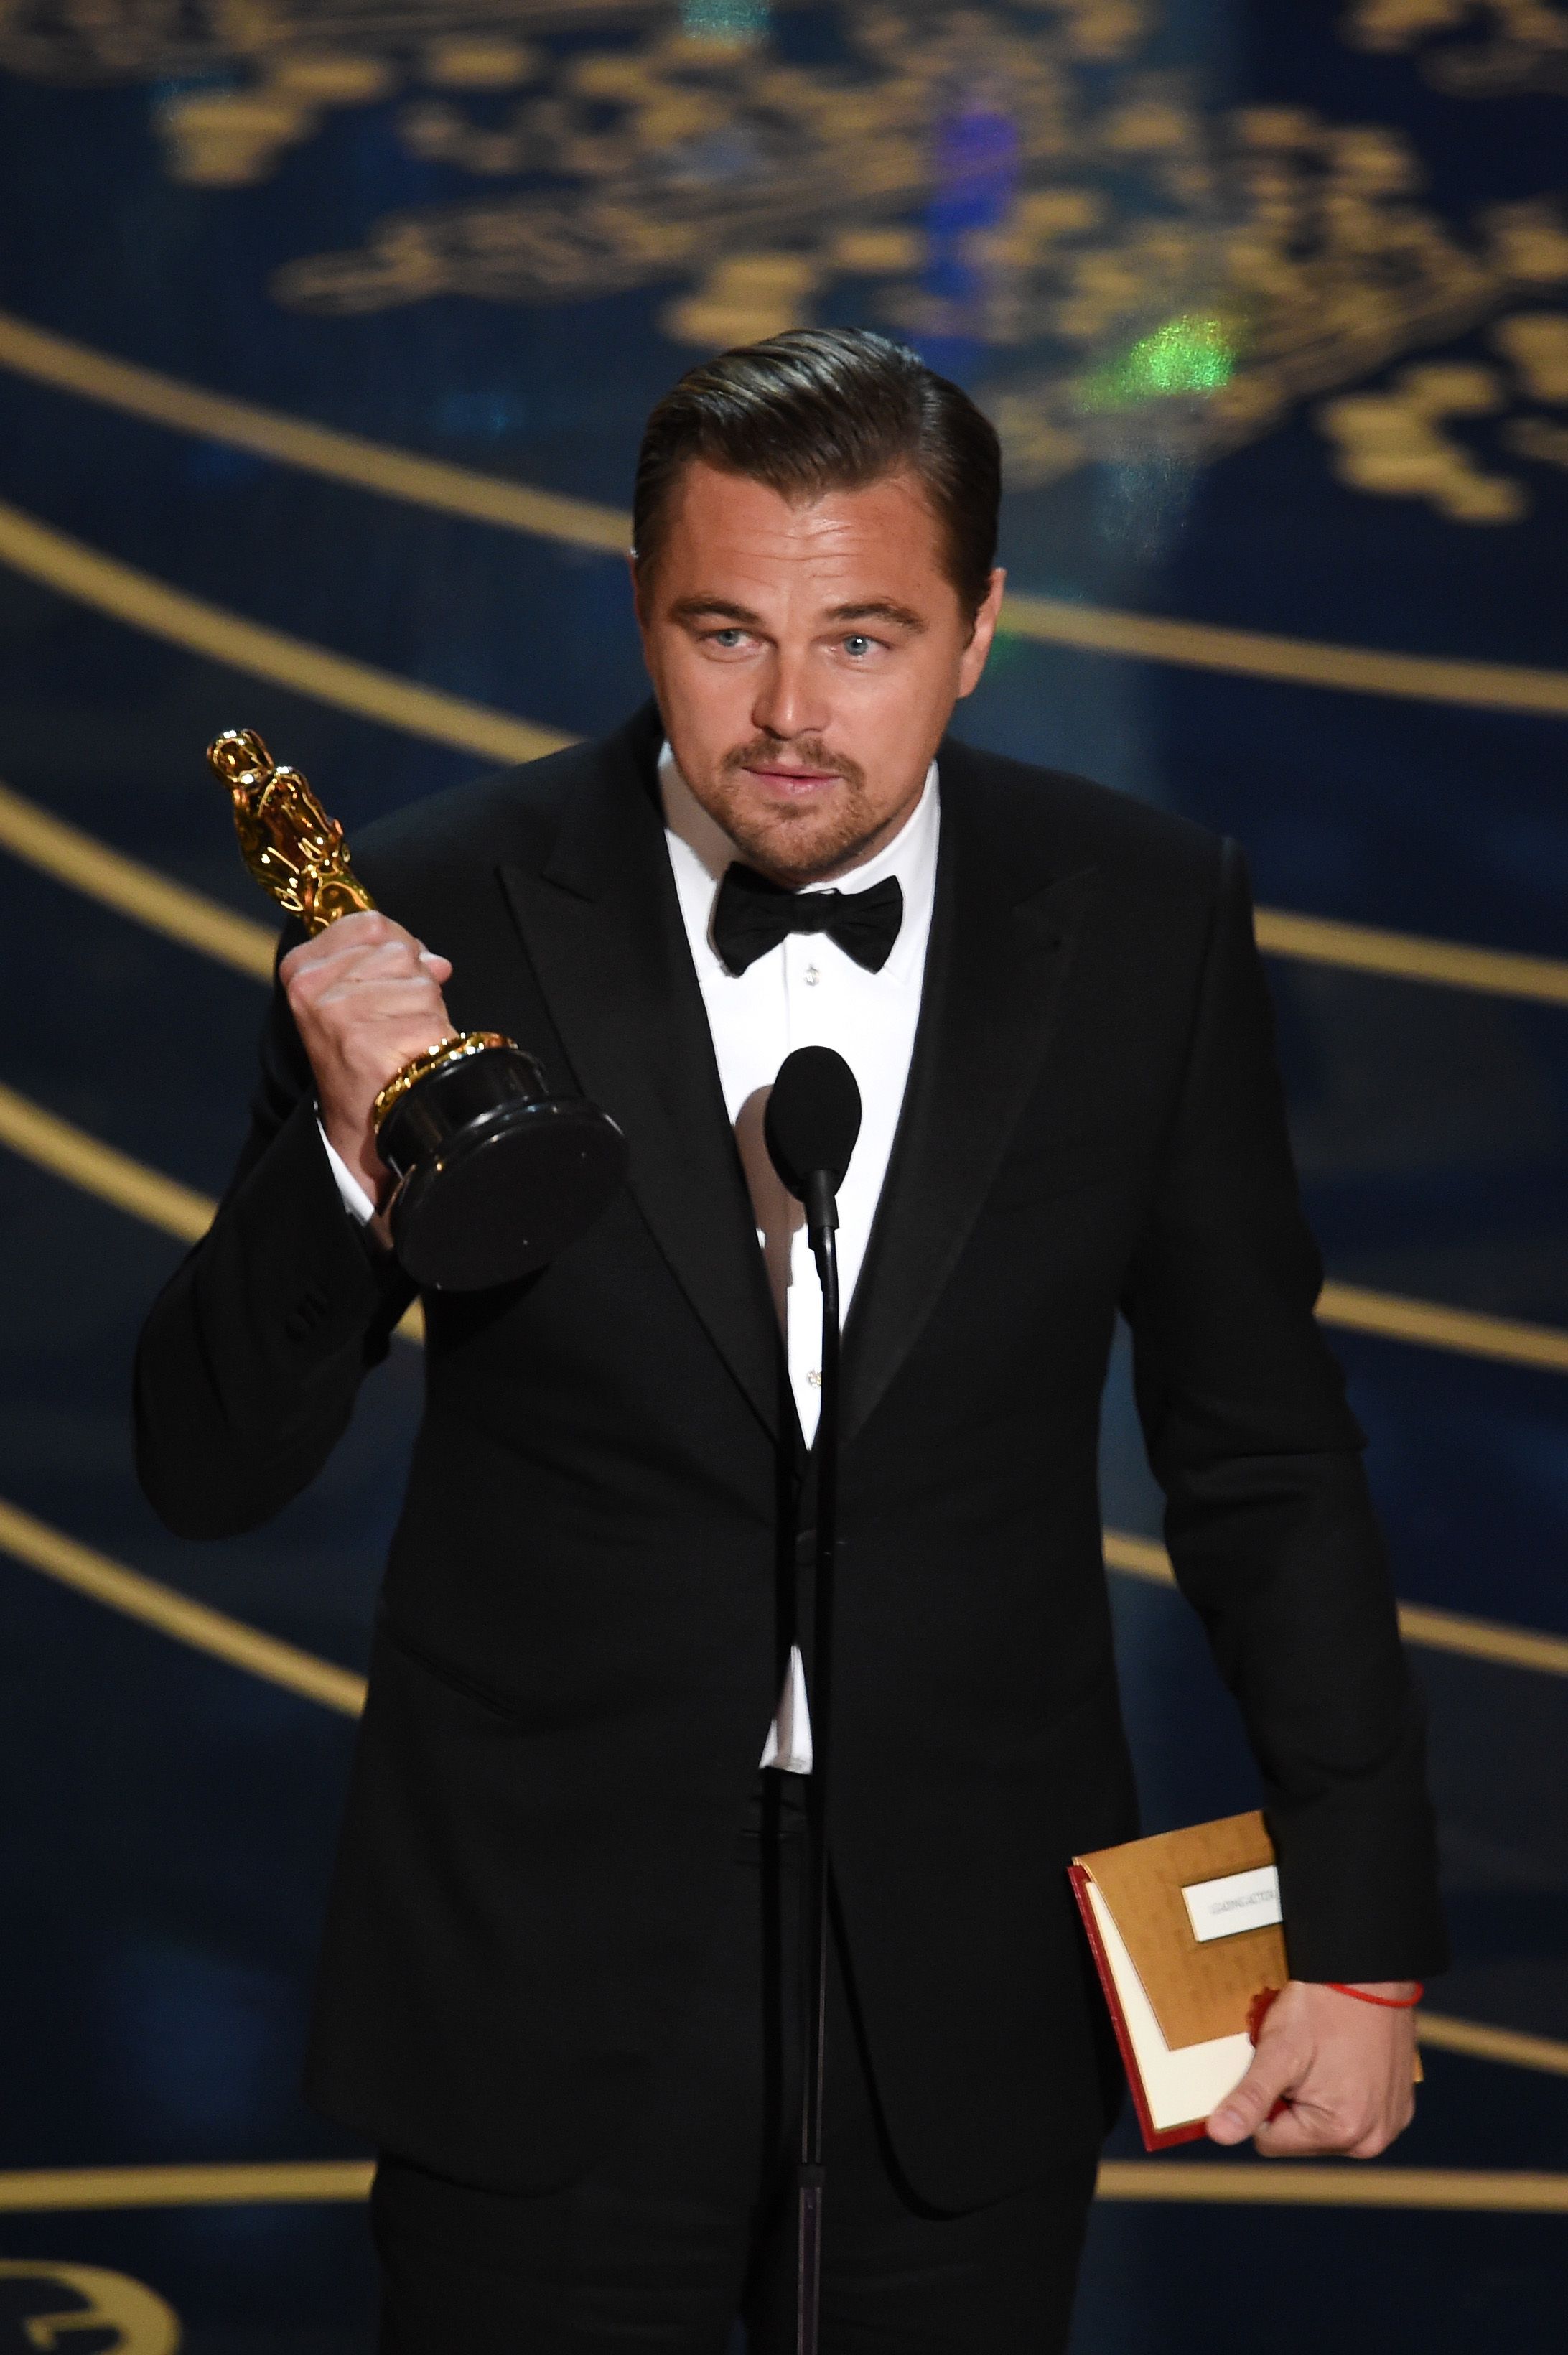 HOLLYWOOD, CA - FEBRUARY 28:  Actor Leonardo DiCaprio accepts the Best Actor award for 'The Revenant' onstage during the 88th Annual Academy Awards at the Dolby Theatre on February 28, 2016 in Hollywood, California.  (Photo by Kevin Winter/Getty Images)